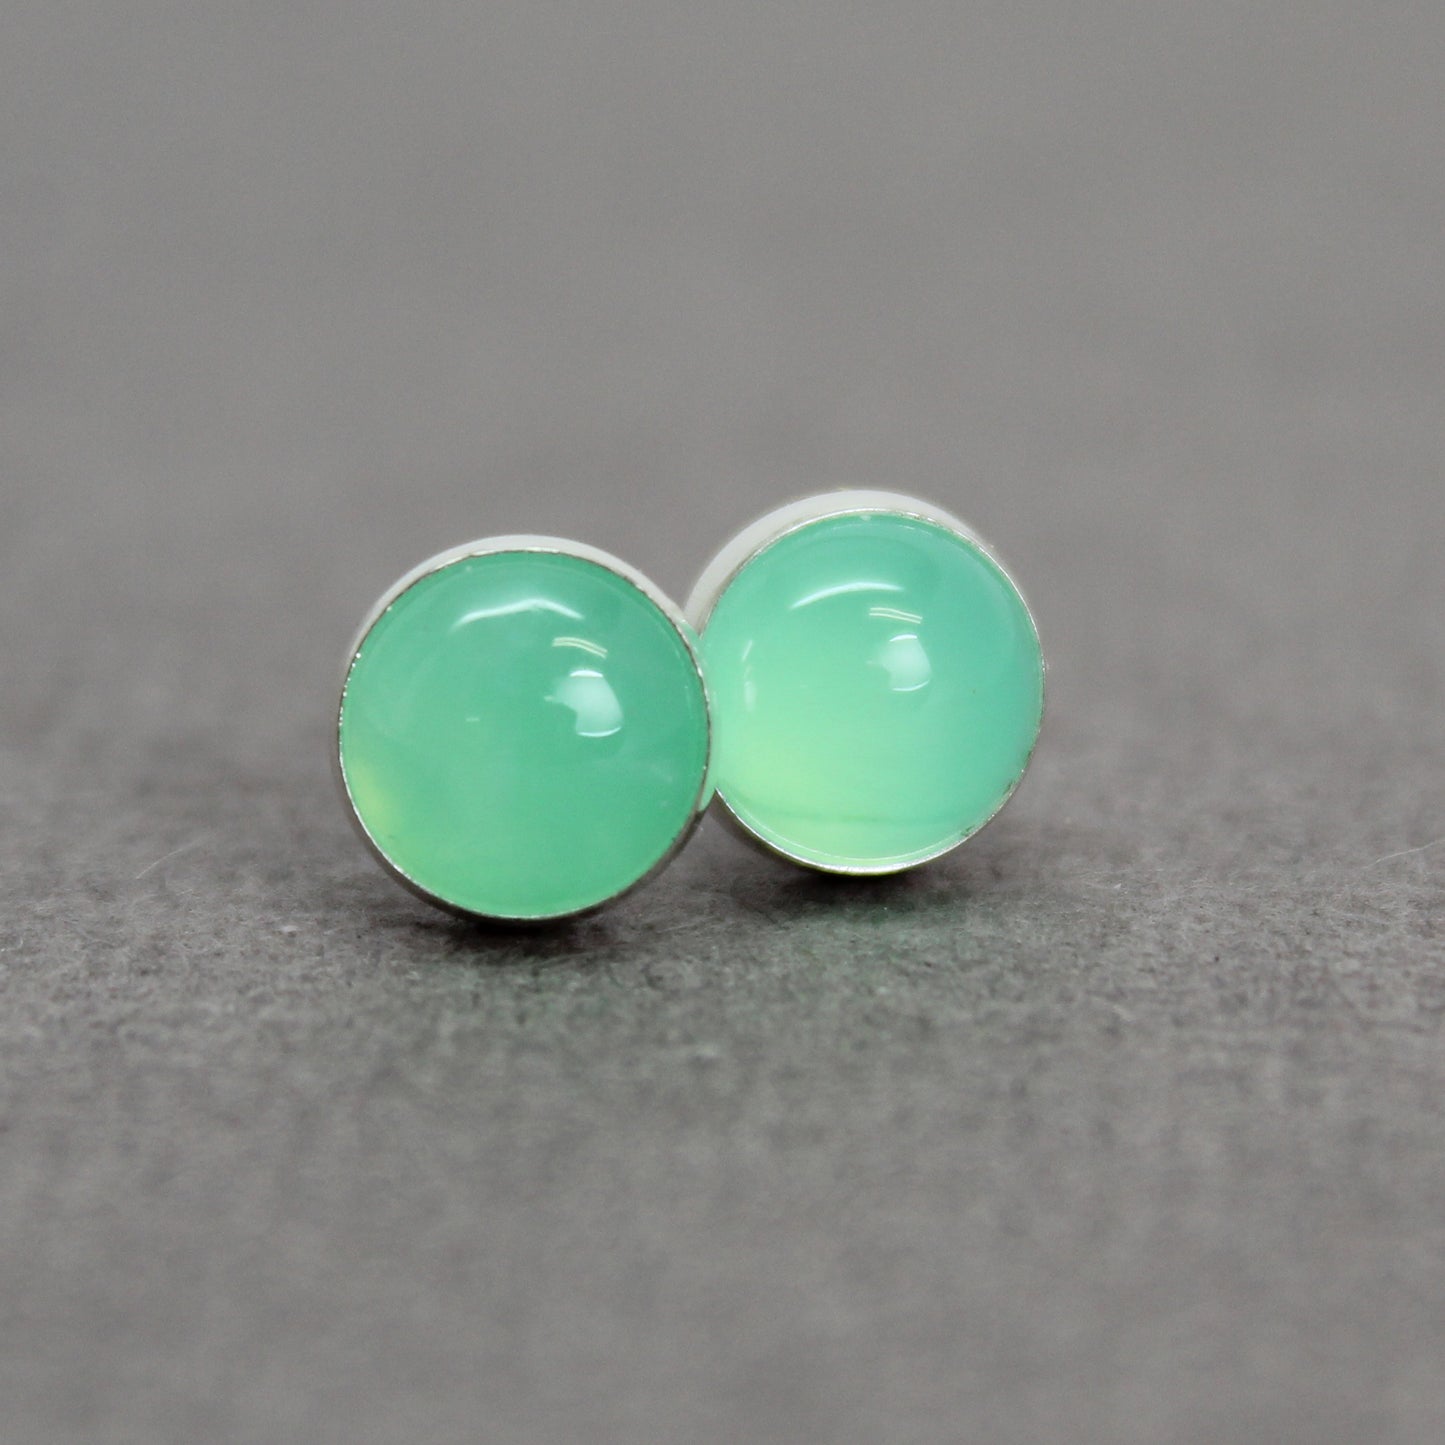 Load image into Gallery viewer, Chrysoprase Stud Earrings in Sterling Silver
